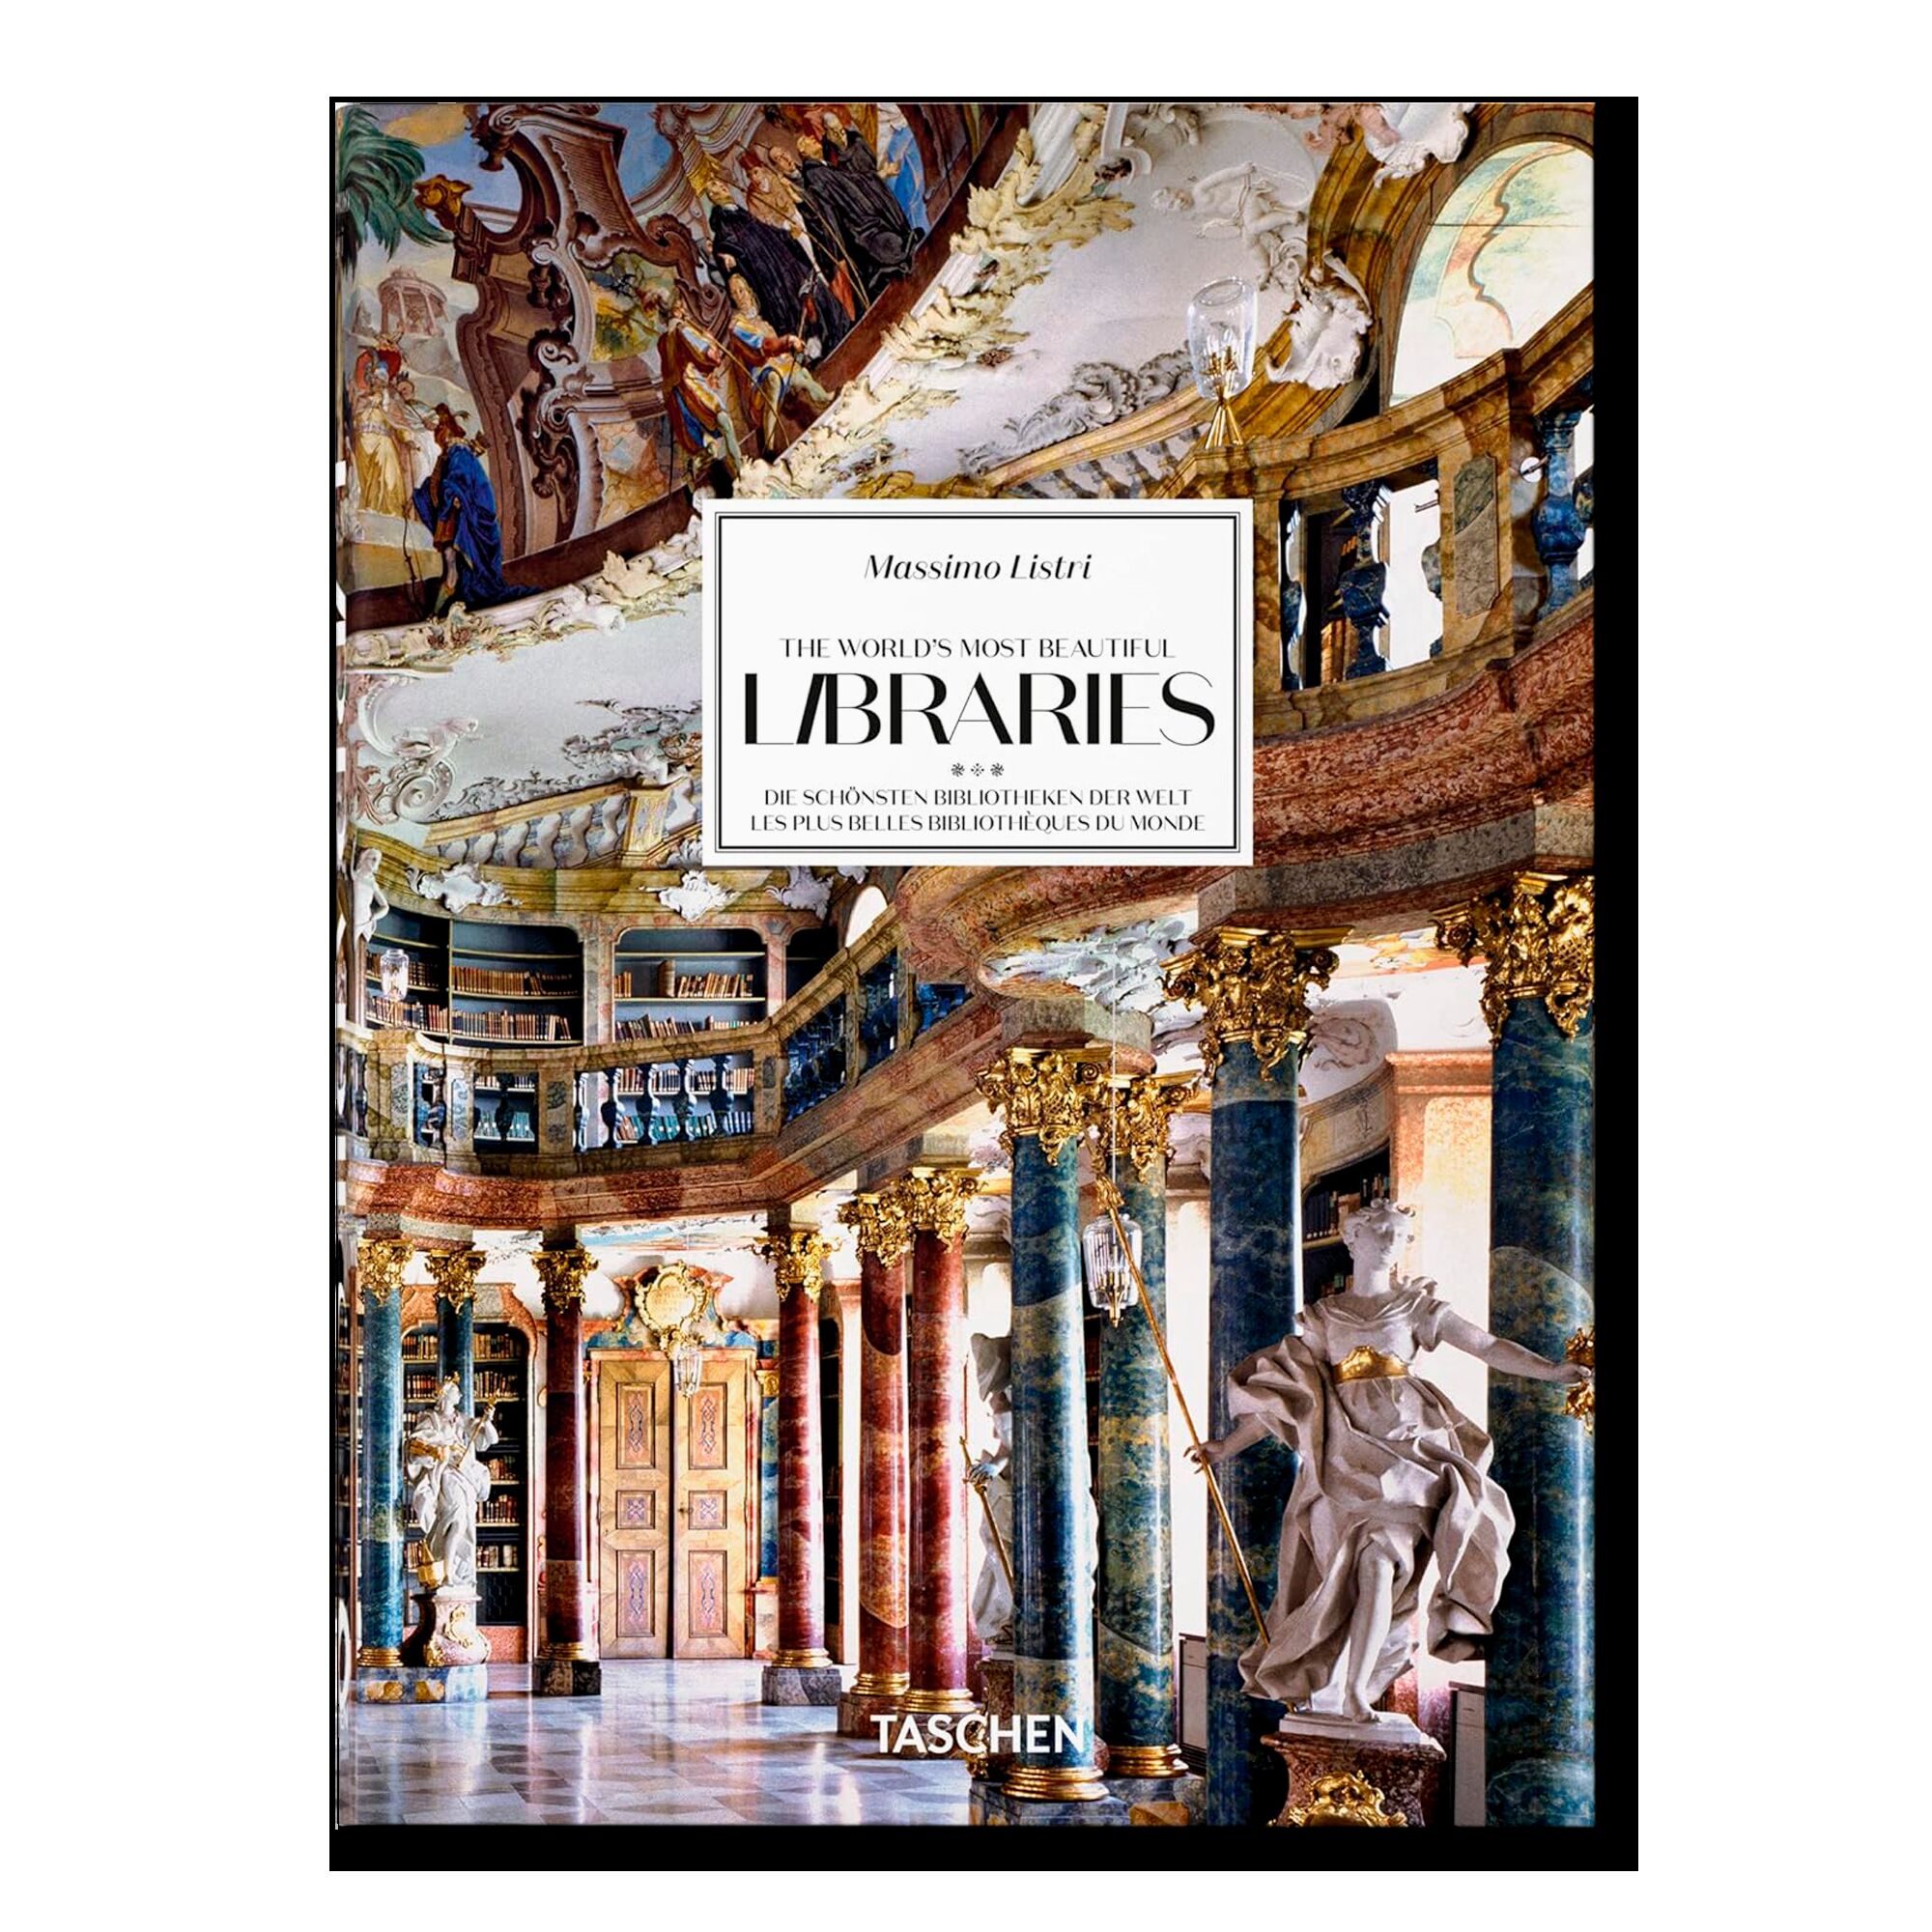 Massimo Listri: The World’s Most Beautiful Libraries (40th Anniversary Edition)